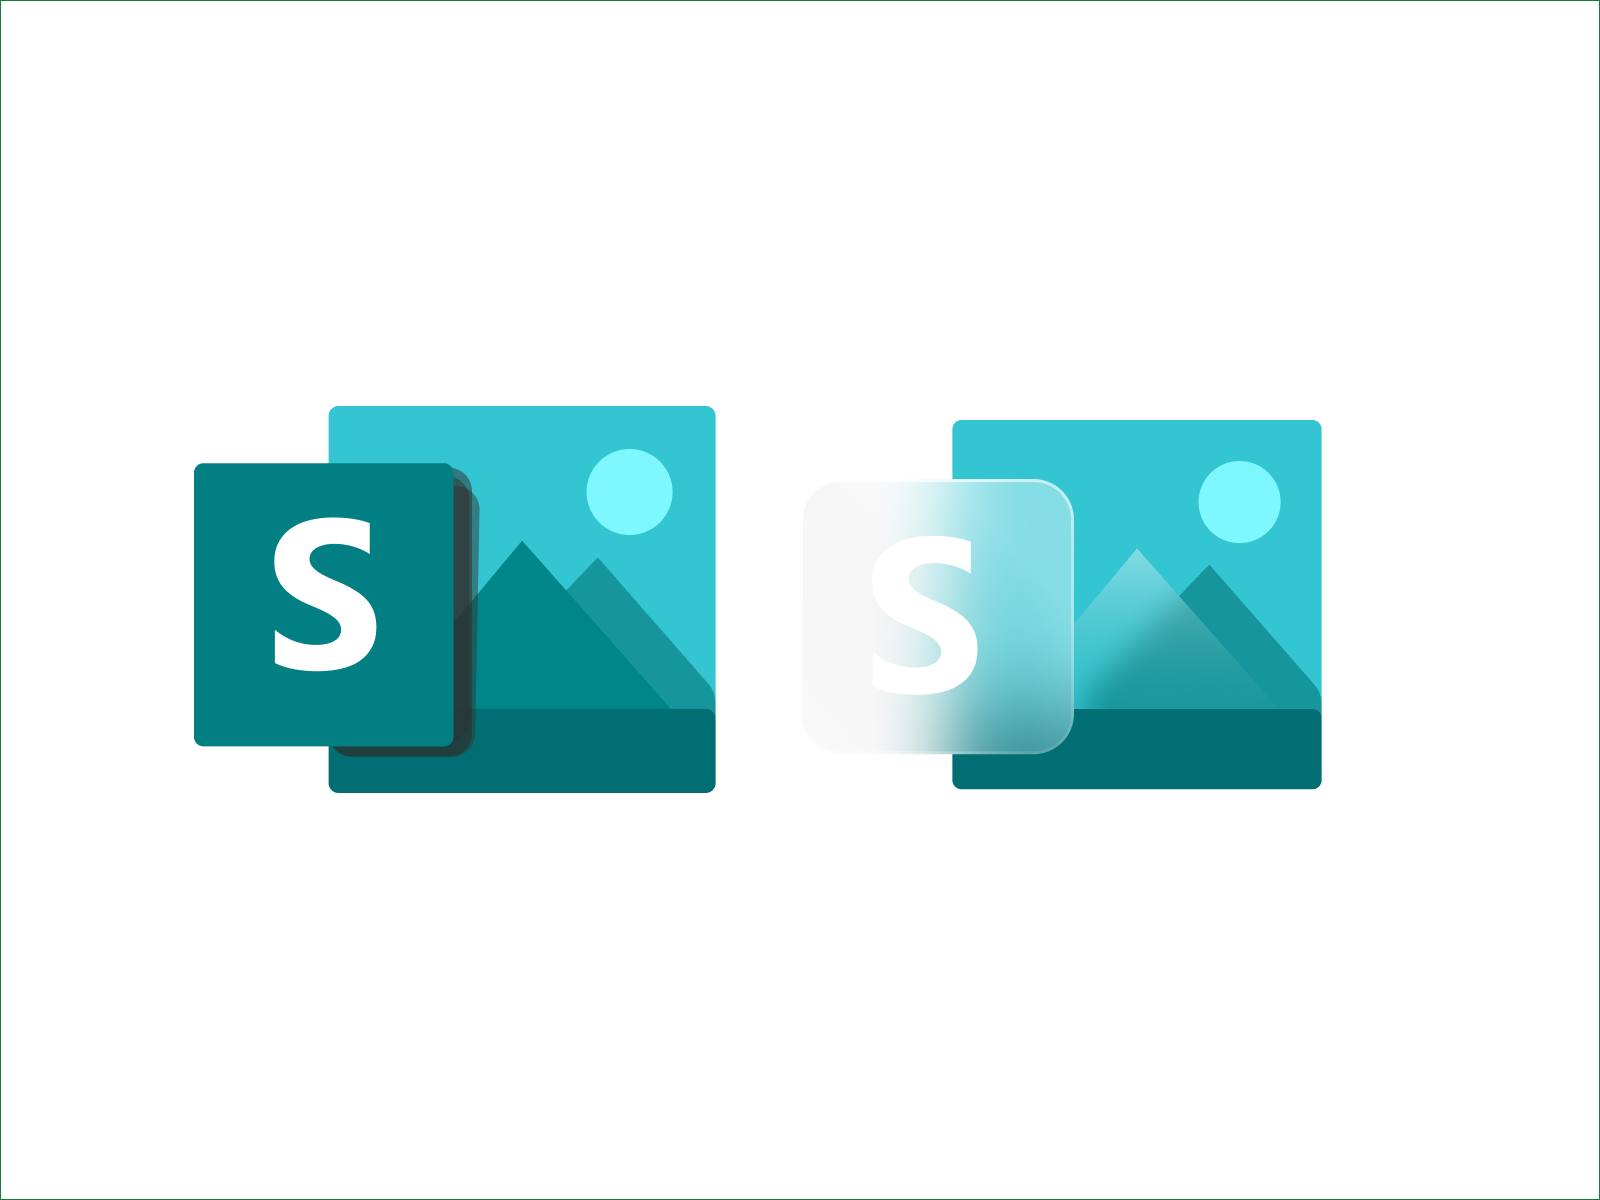 Microsoft Sway Icons By Srivathson Thyagarajan On Dribbble 9076